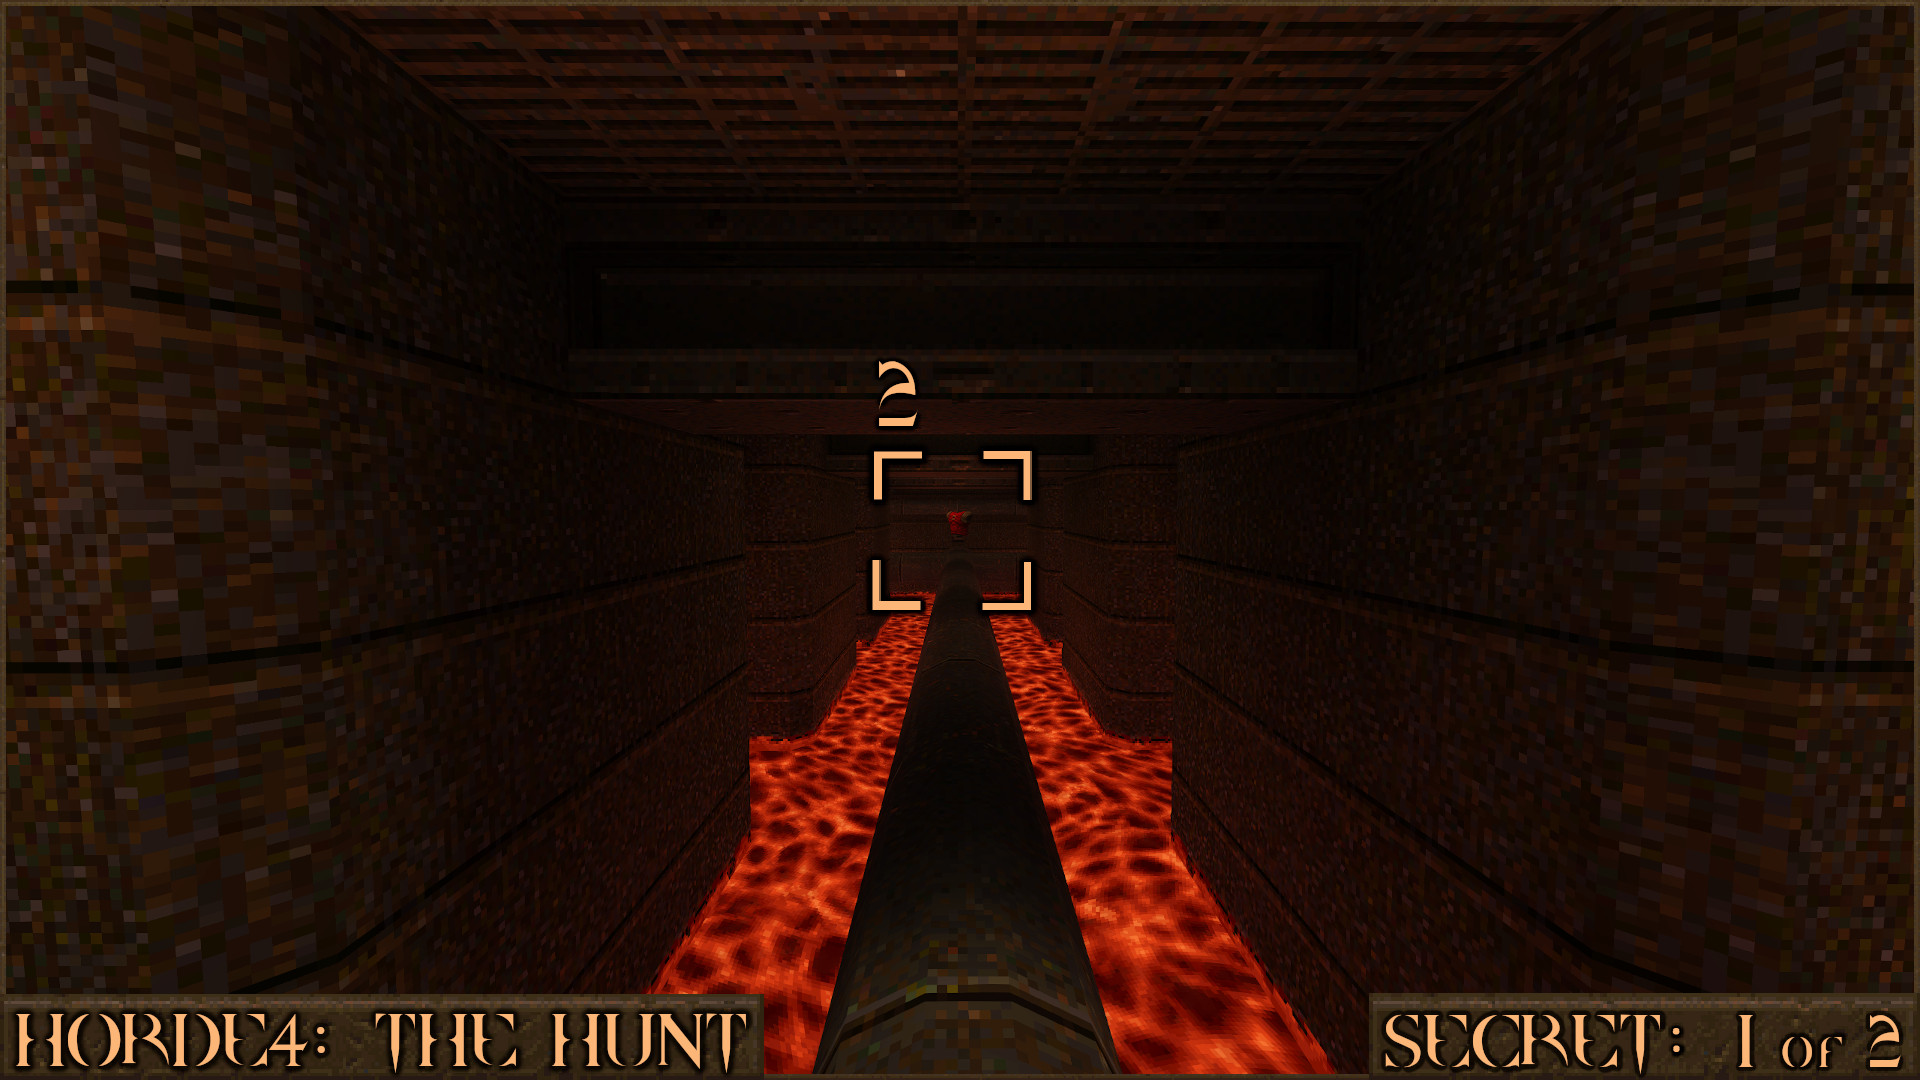 Quake - Finding all the Secrets - HORDE4: The Hunt - 980CAE5